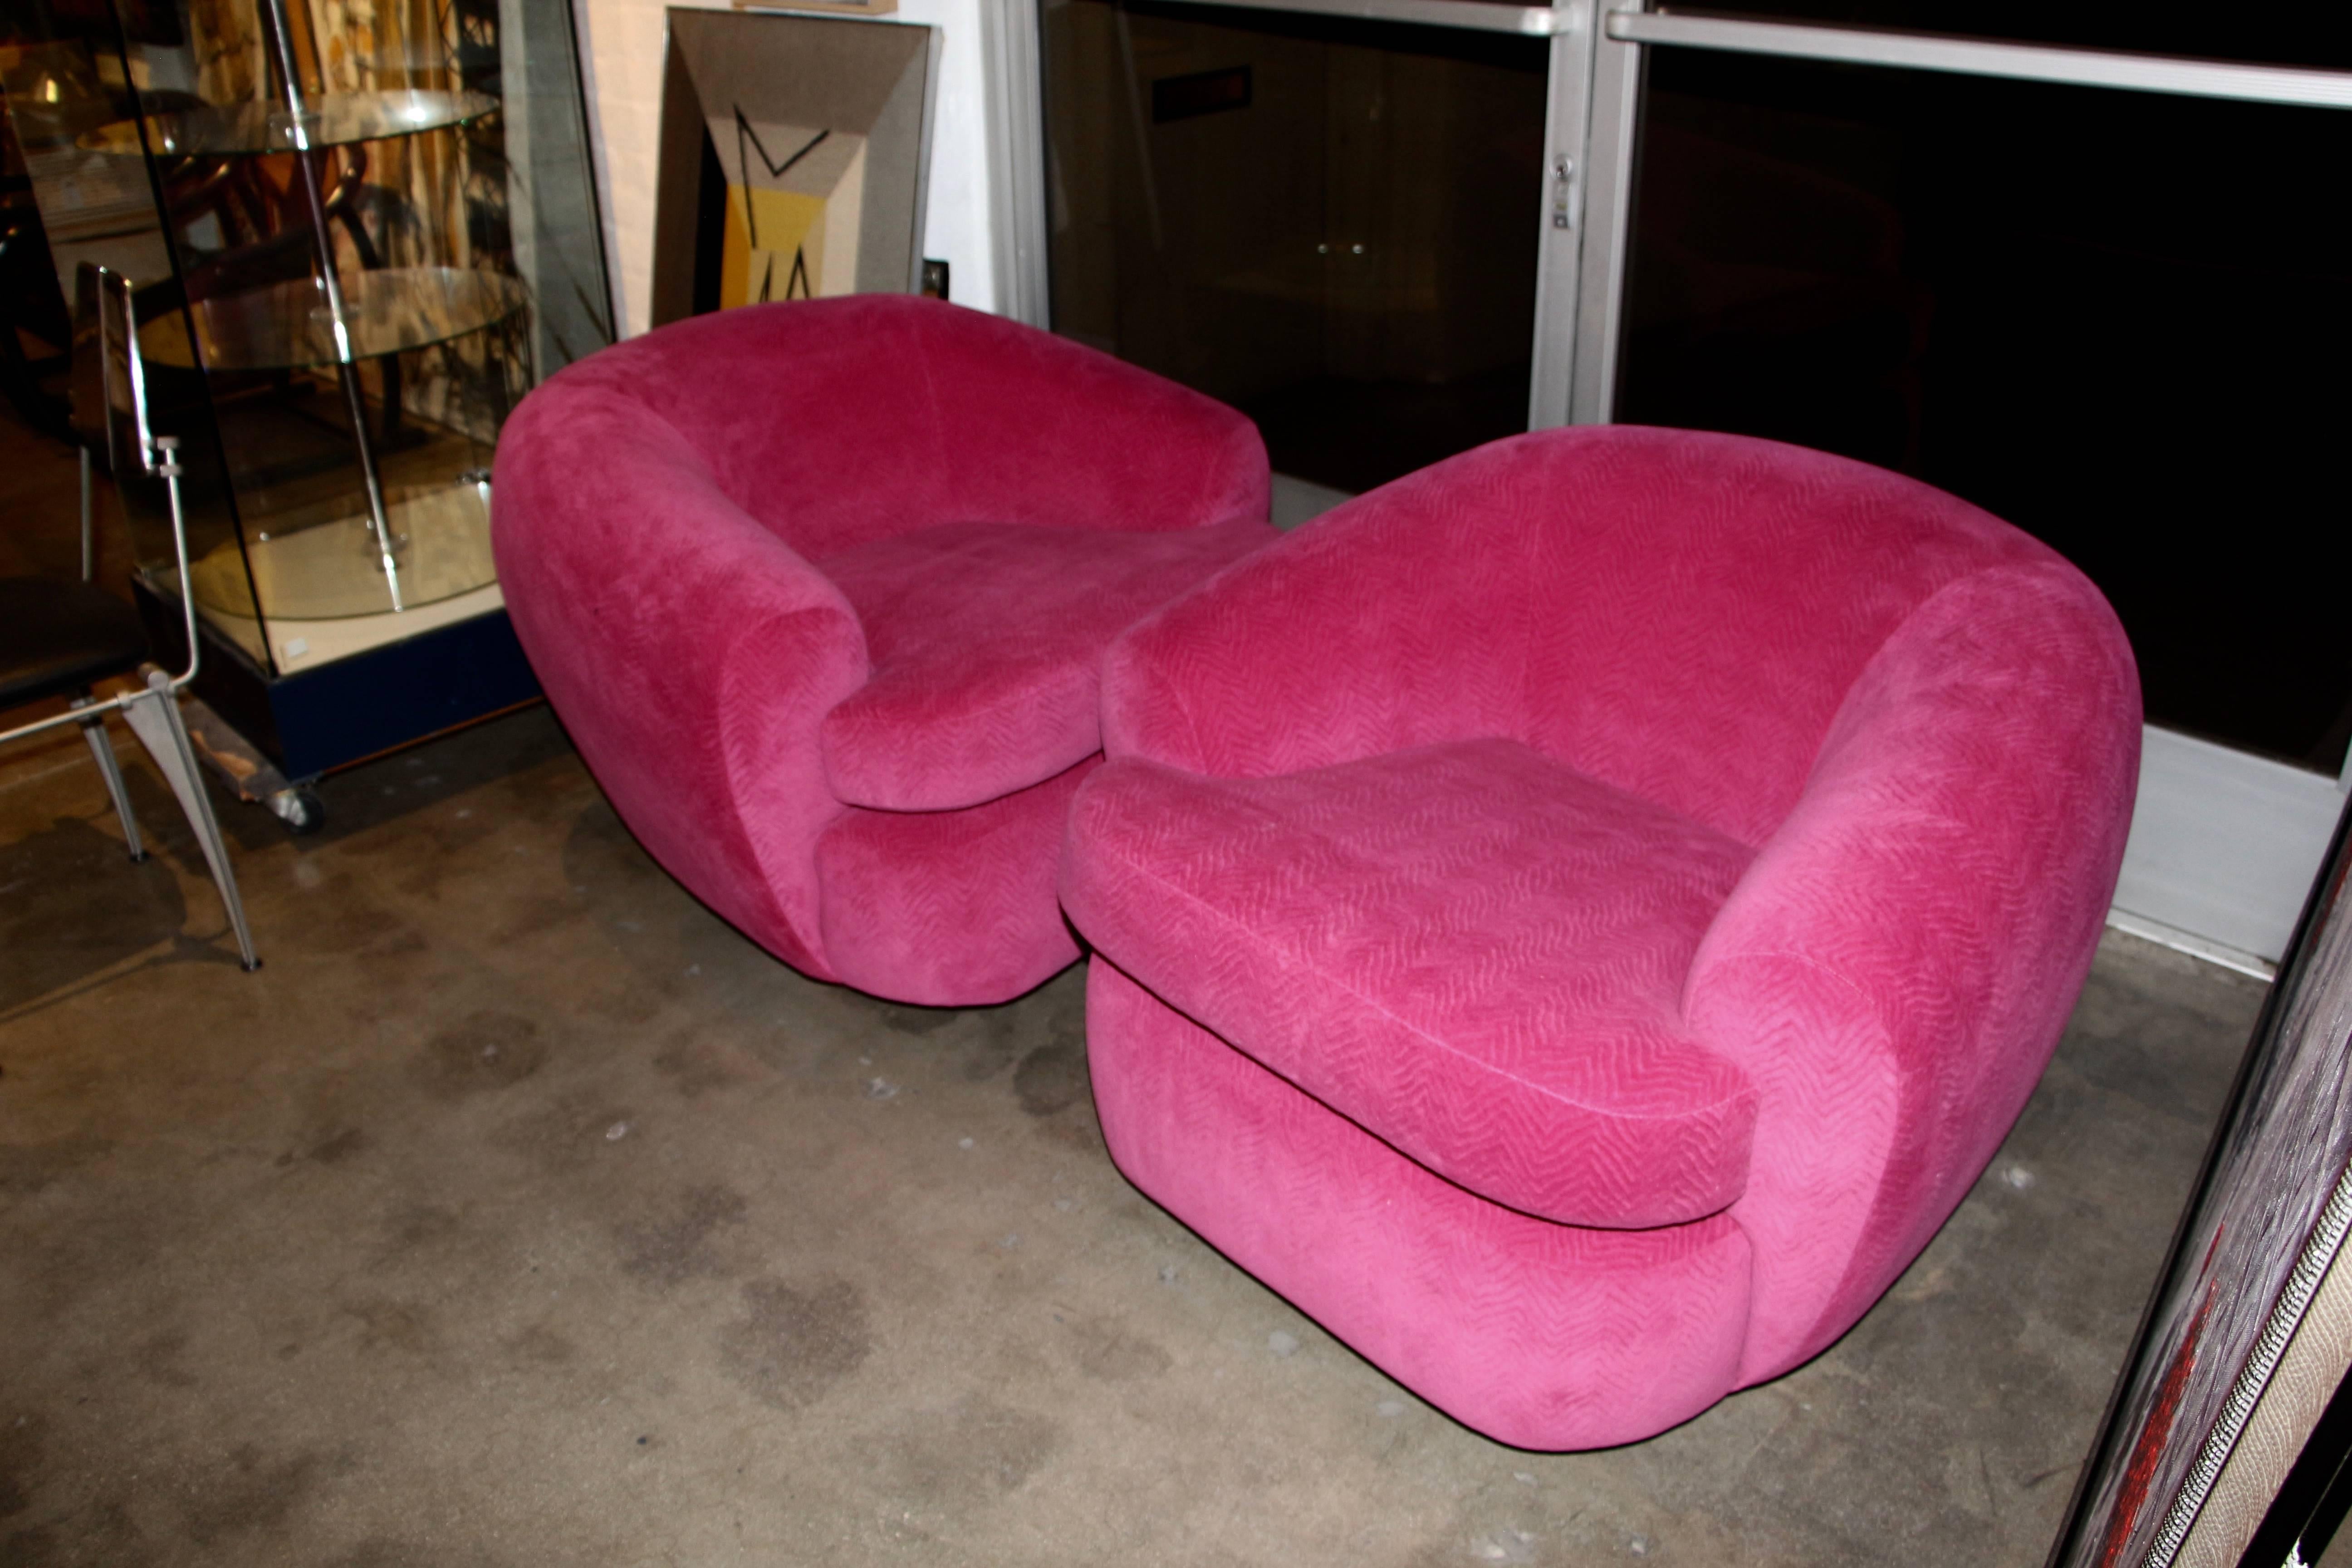 20th Century Pair of Club or Lounge Swivel Chairs in Hot Pink Wool Mohair